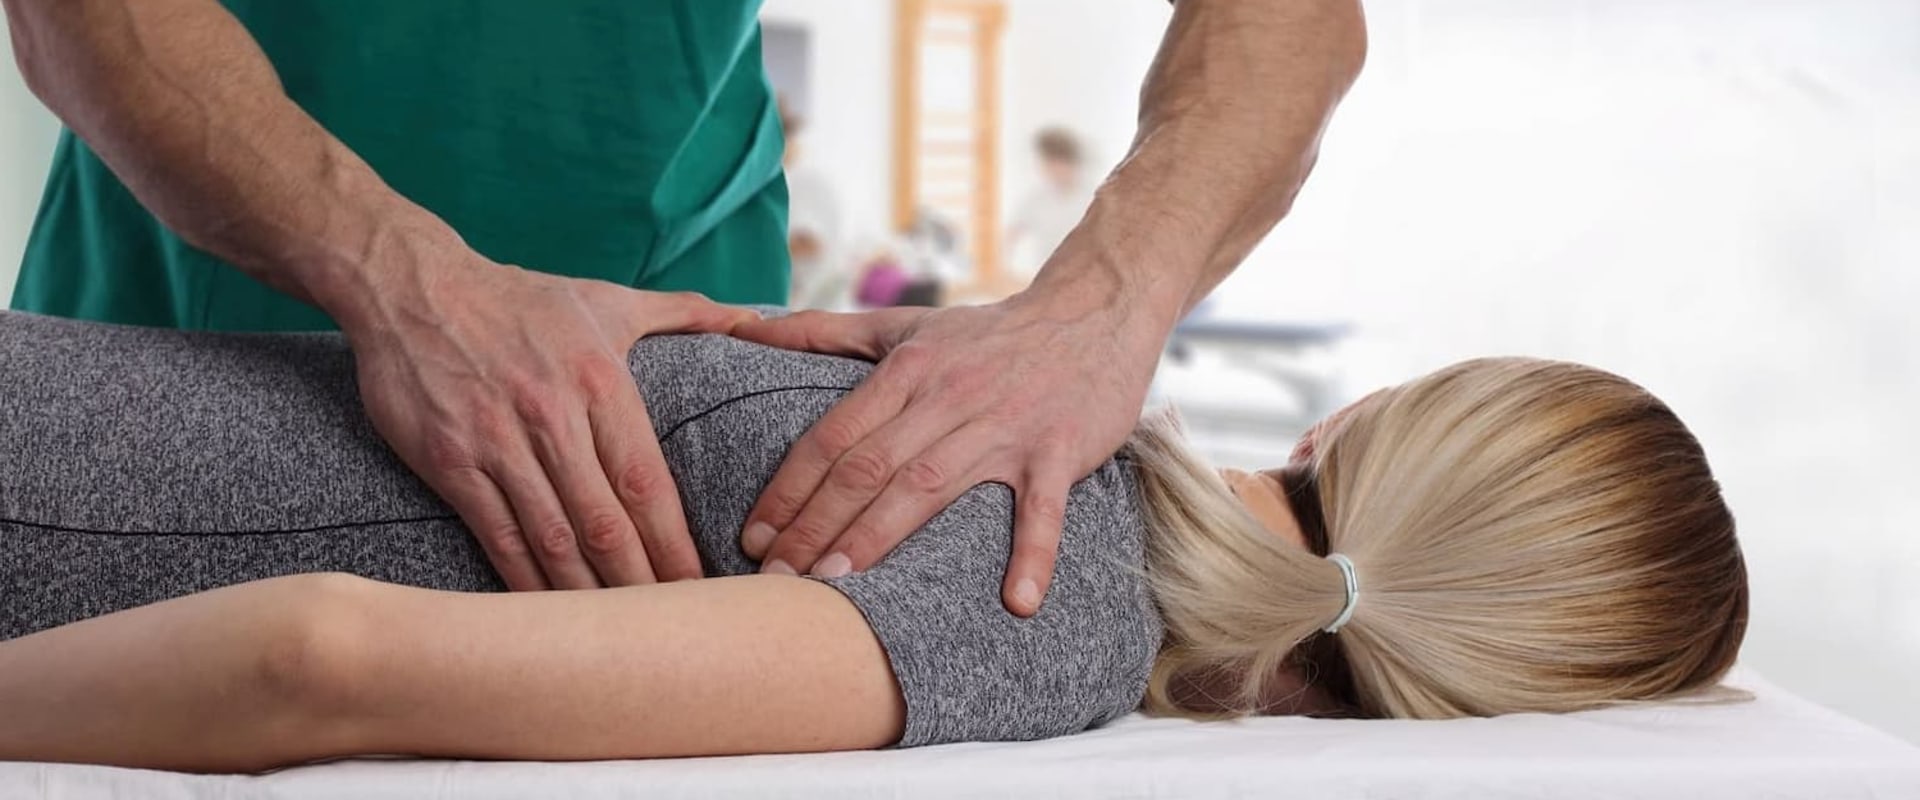 Are There Any Risks of Seeing an Australian Chiropractor?